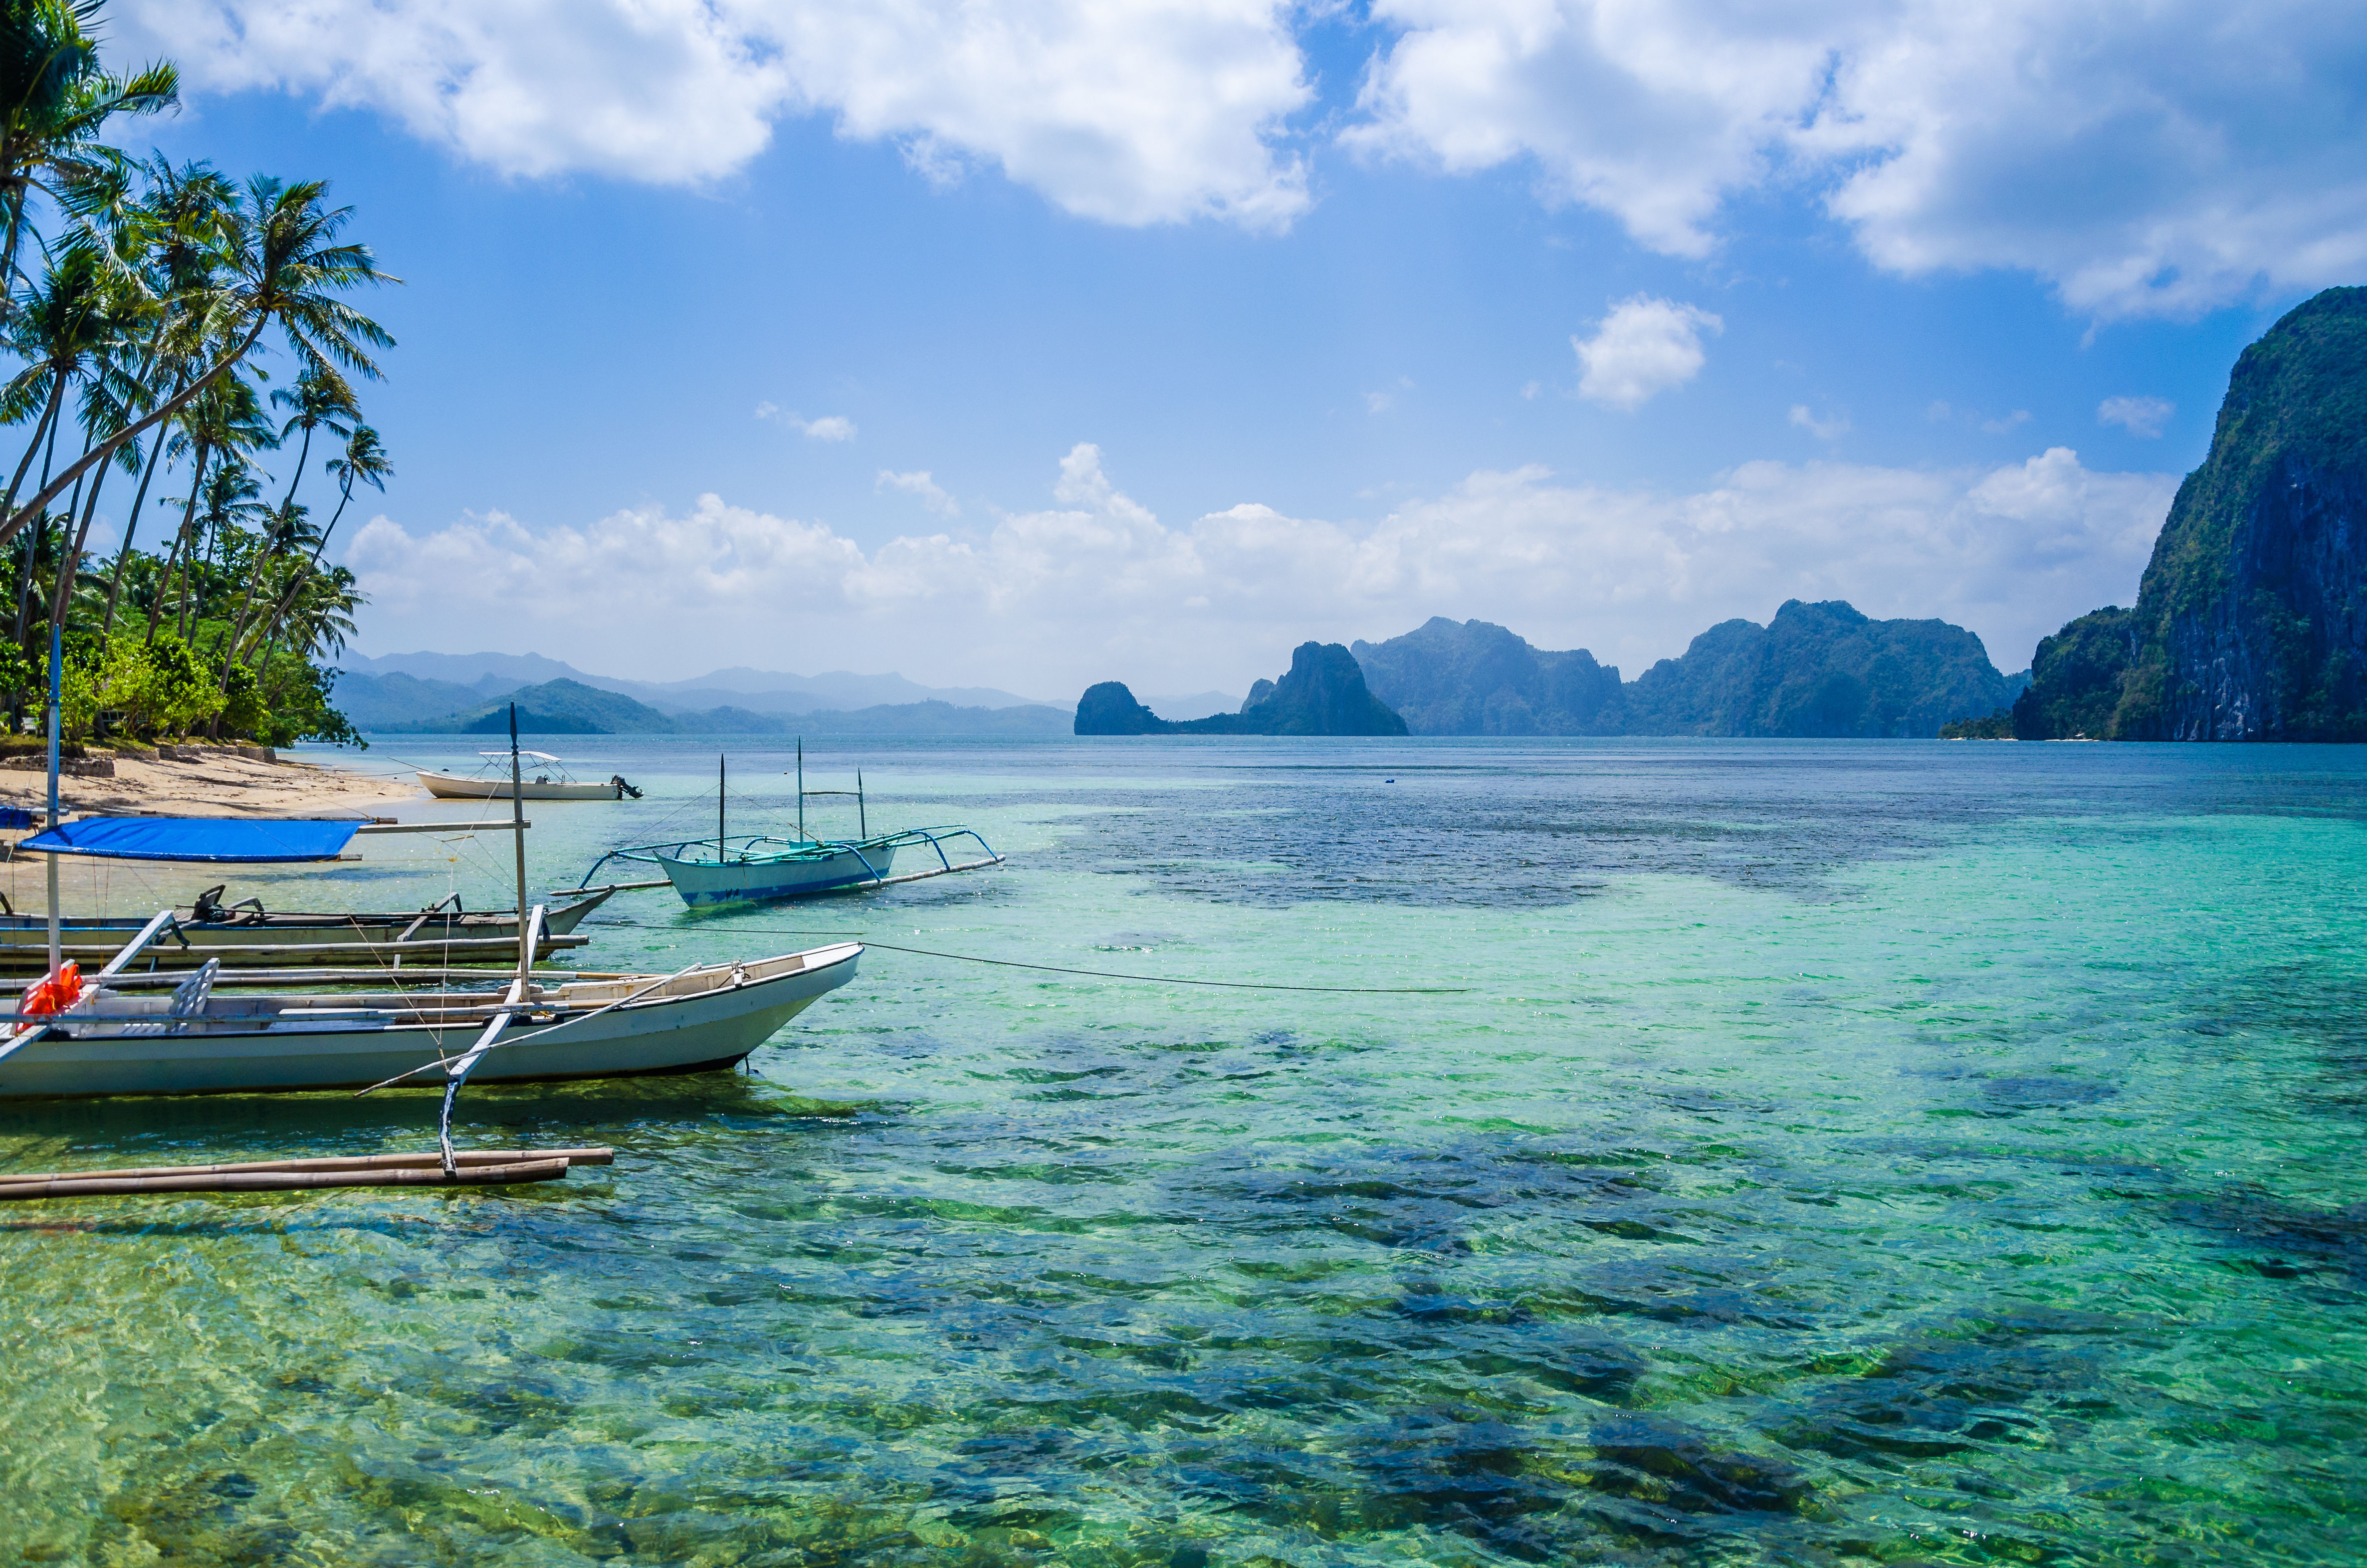 Traditional Filipino boats moored on sandy beach with shallow clear turquoise water and limestone cliffs in the background, Coron, Philippines. 